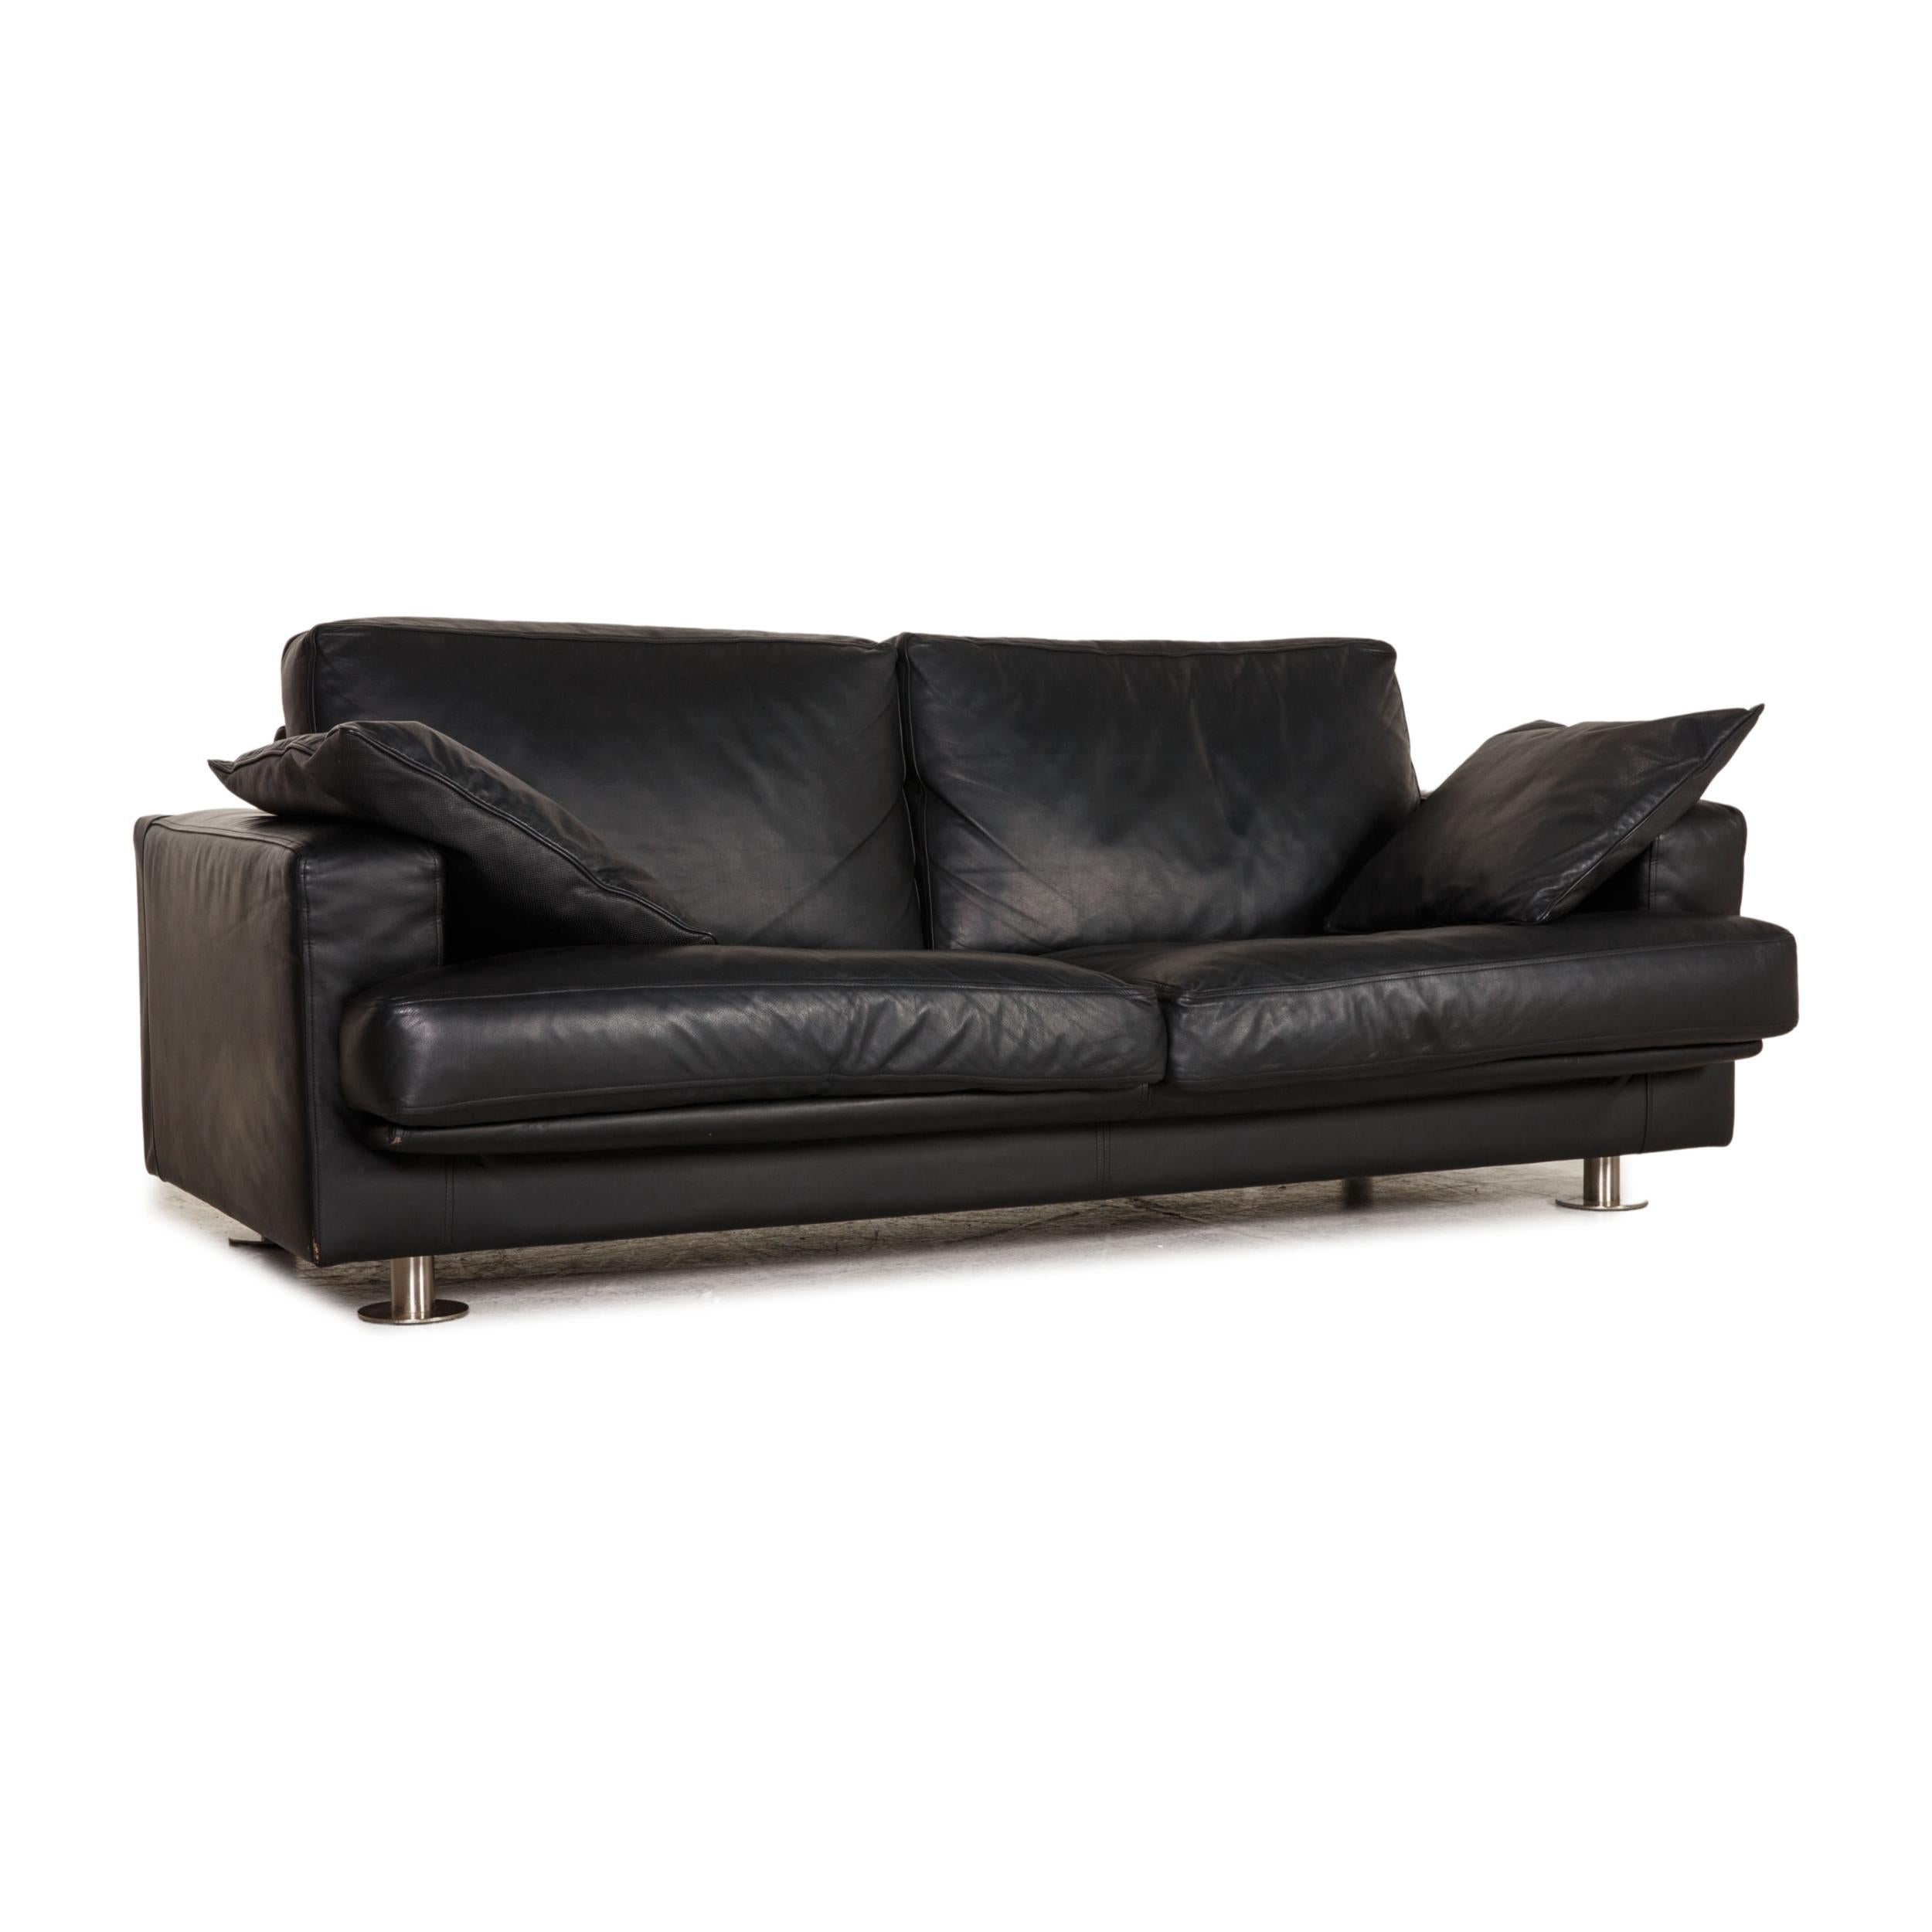 Contemporary Minotti Lay Down Leather Sofa Black Two Seater Couch For Sale